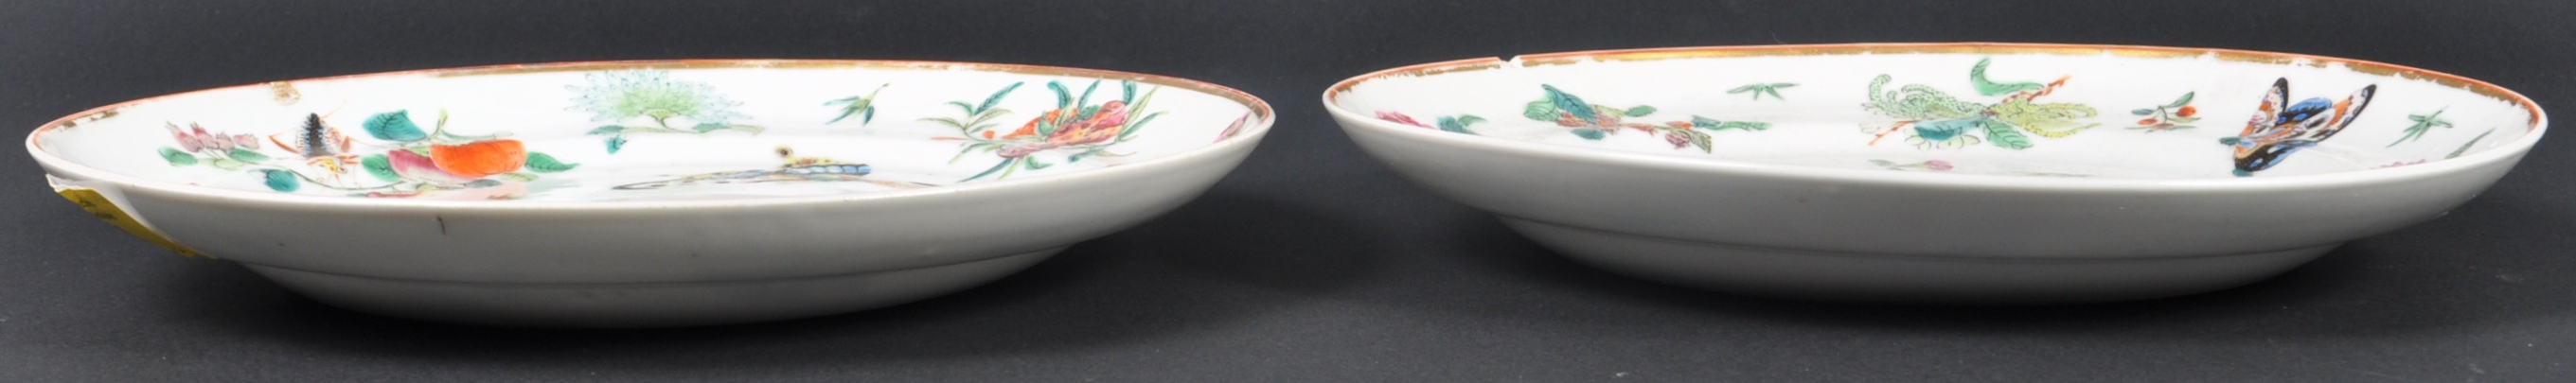 PAIR OF 18TH CENTURY FAMILLE ROSE QING DYNASTY CHINESE PLATES - Image 3 of 10